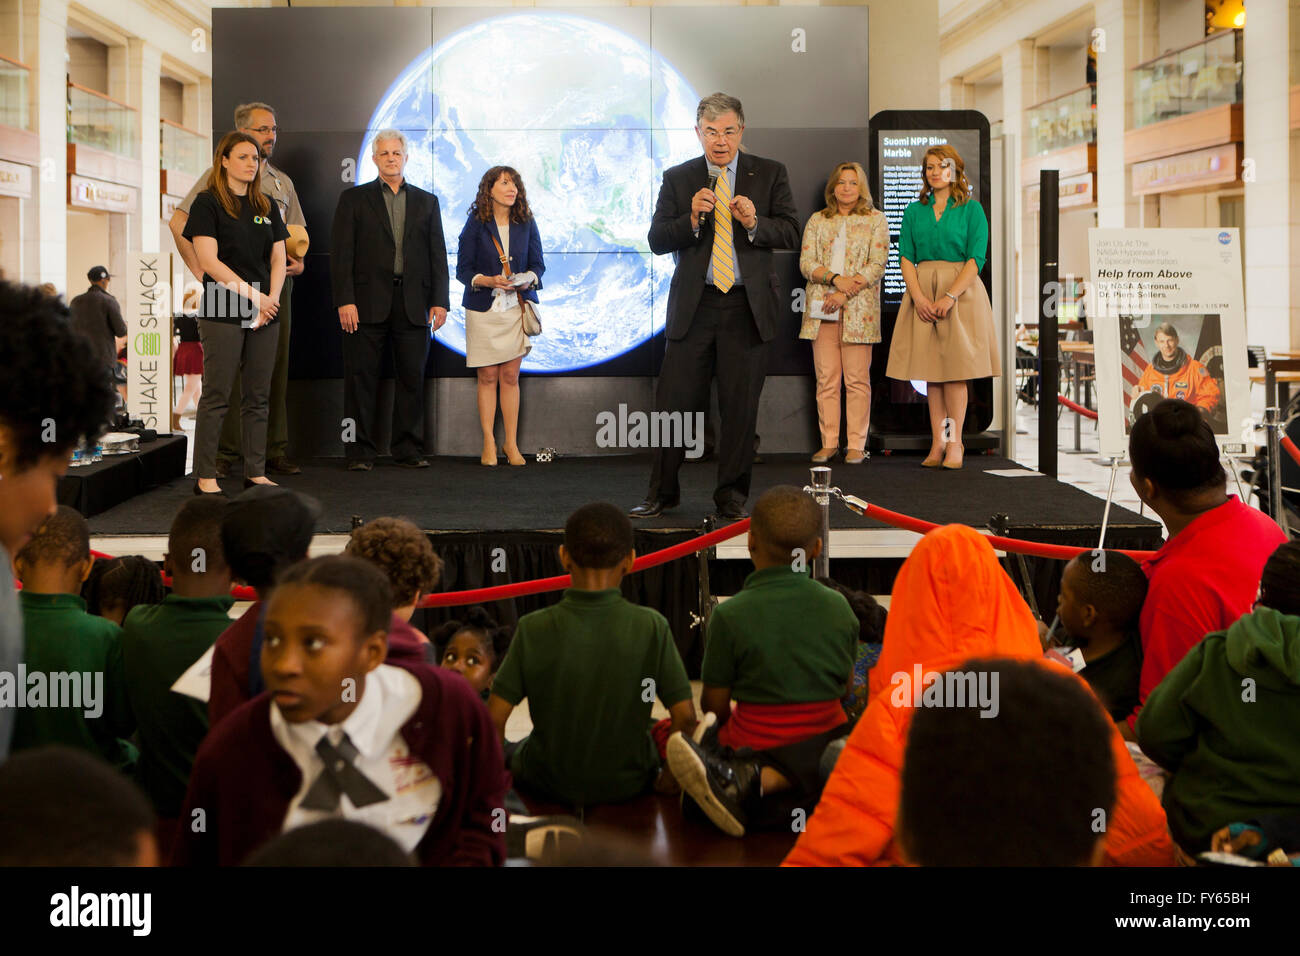 Washington DC, USA. 22nd Apr, 2016. NASA celebrates Earth day with the public in the Main Hall of Union Station in Washington, DC. Many scientists, astrophysicists, and astronaut Dr. Piers Sellers presented latest space and earth science studies and technologies, and shared stories of their experience working with NASA. Credit:  B Christopher/Alamy Live News Stock Photo